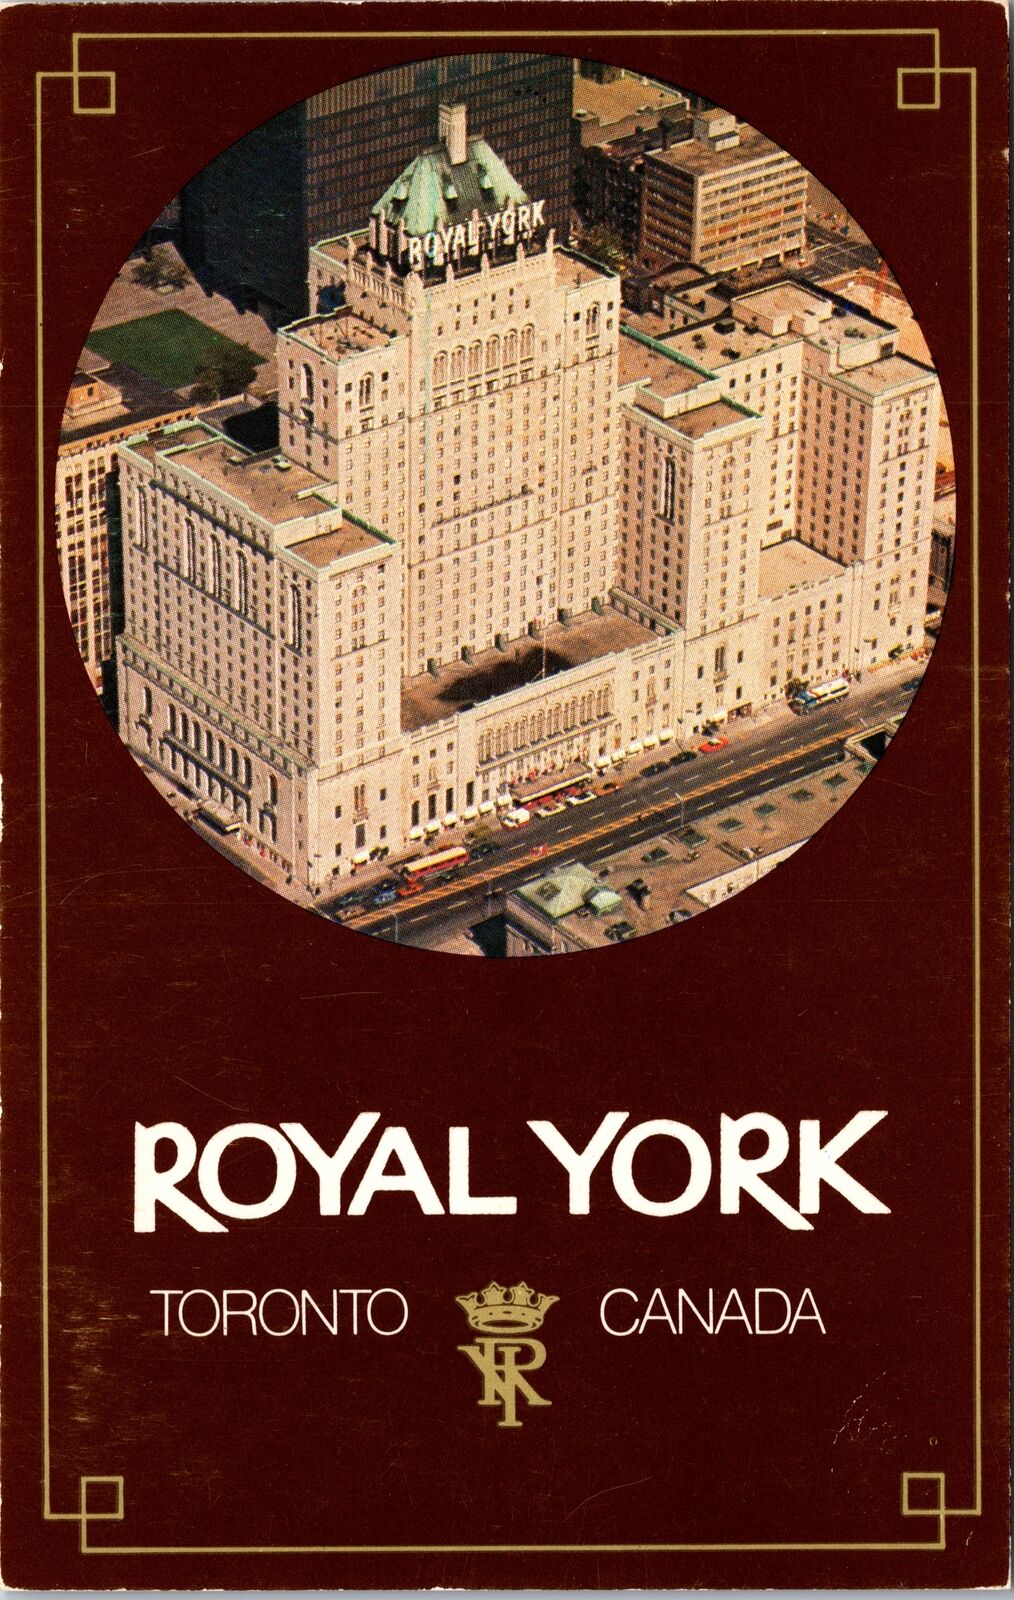 VINTAGE POSTCARD AERIAL VIEW OF THE ROYAL YORK HOTEL DOWNTOWN TORONTO c. 1970s